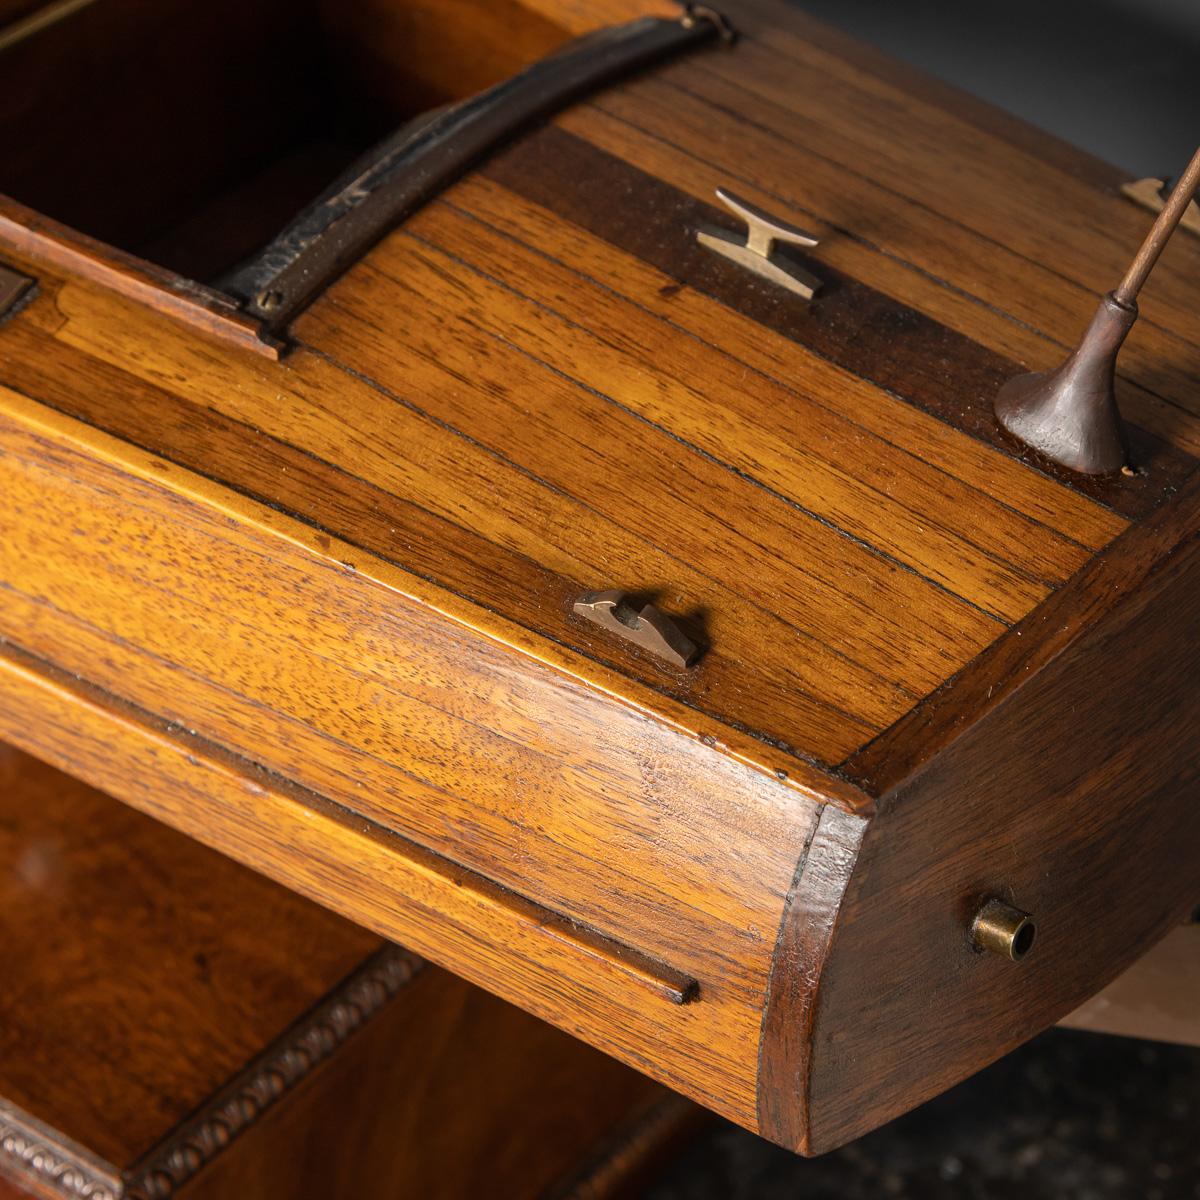 20th Century Mahogany & Rosewood Speed Boat Made in the State Prison, c.1930 For Sale 5